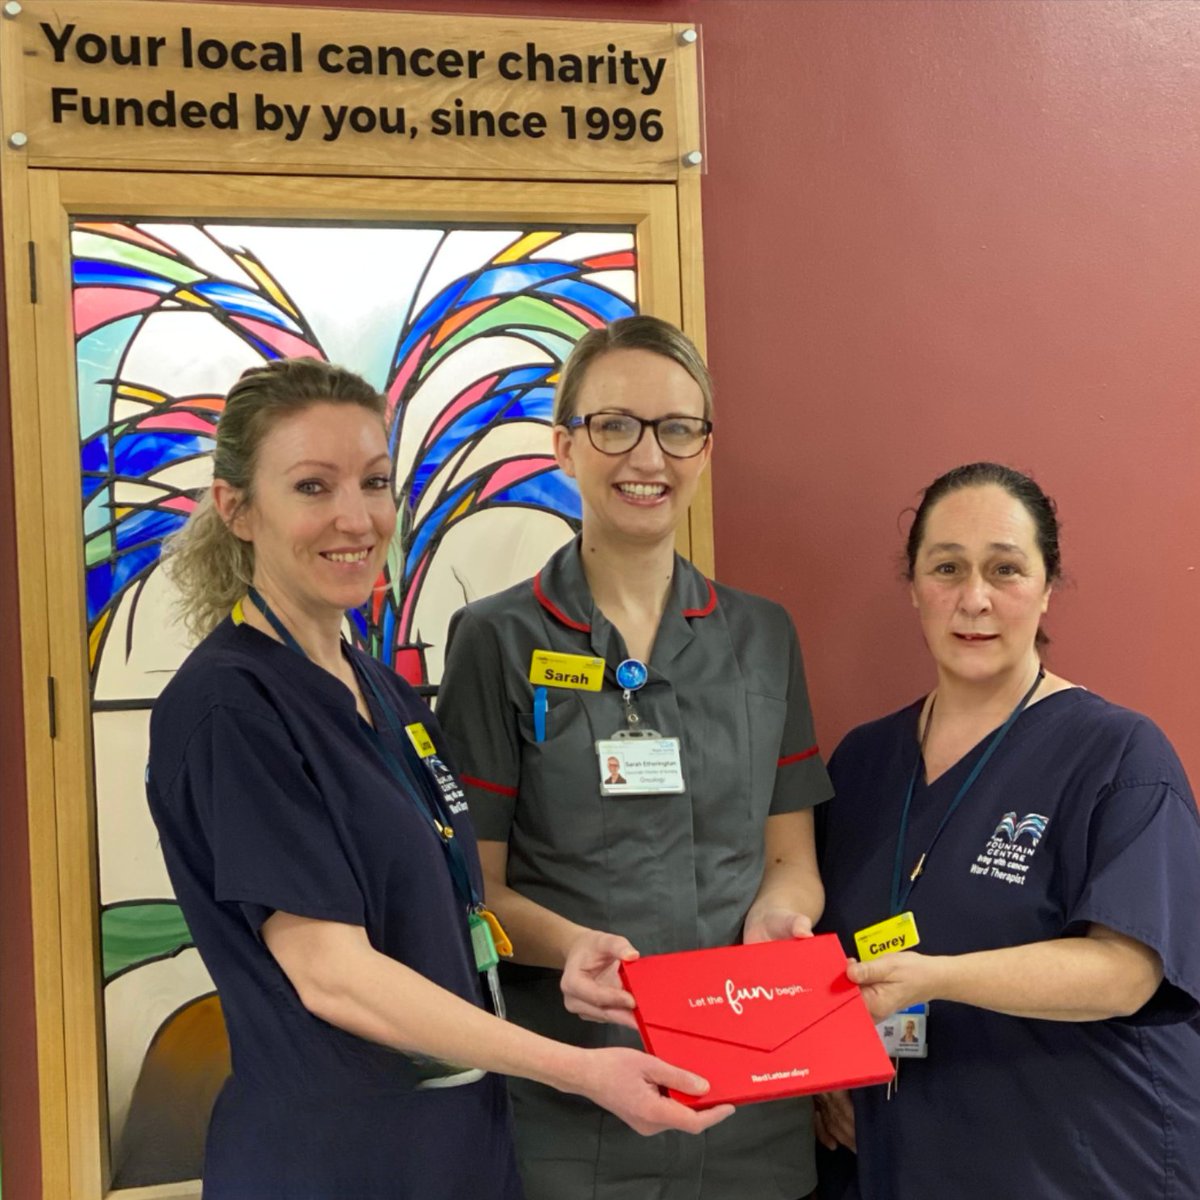 Congrats to our ward therapists Lorna and Carey who are buzzing after receiving a Bee’s Knees Award 🐝 The Bee’s Knees Awards were launched in our Centre Centre last year and celebrate the care and commitment that our colleagues provide for patients.